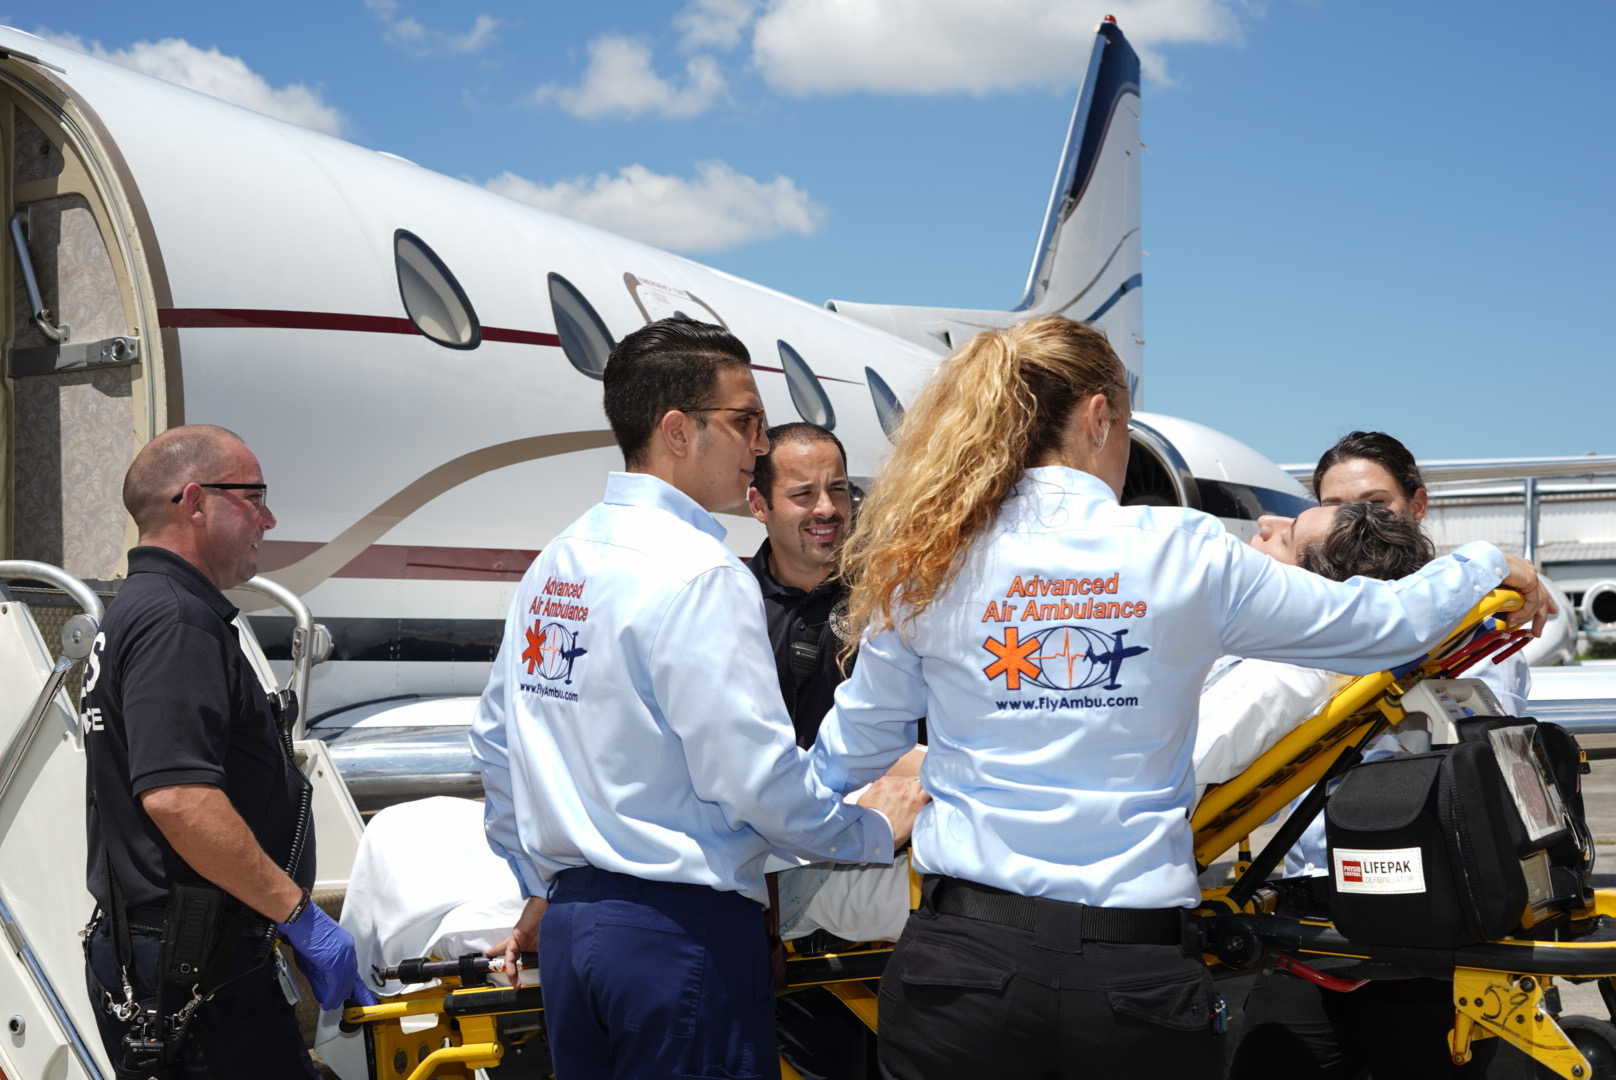 Patient and nurses help load the patient onto the air ambulance aircraft.